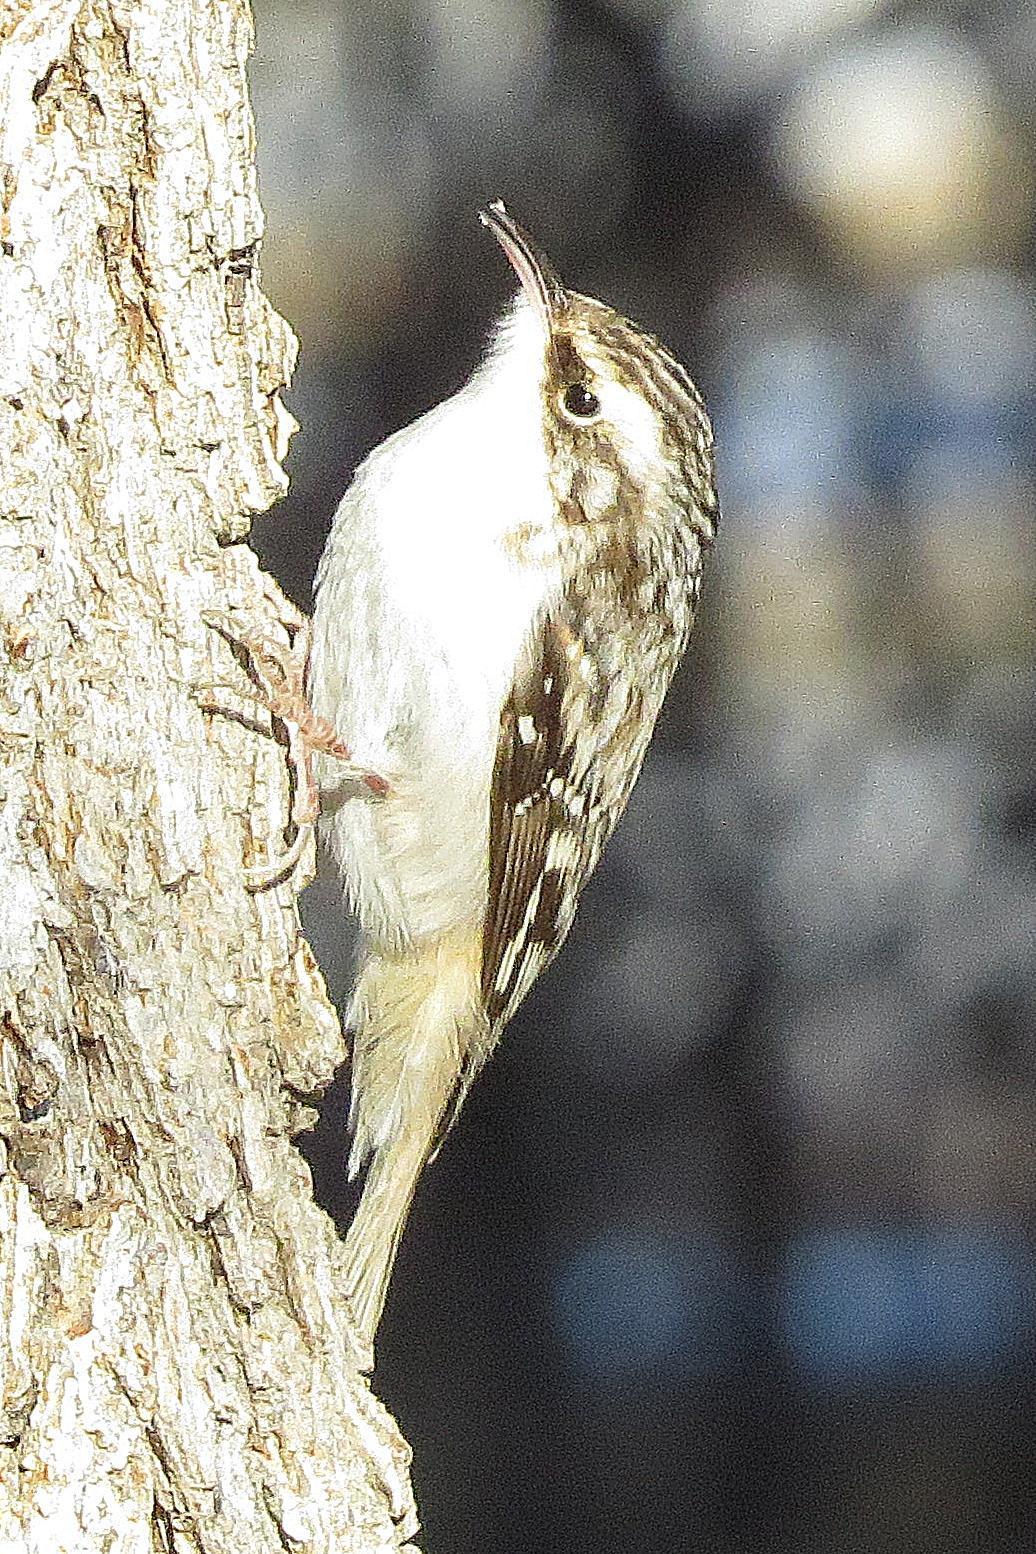 Brown Creeper Photo by Enid Bachman